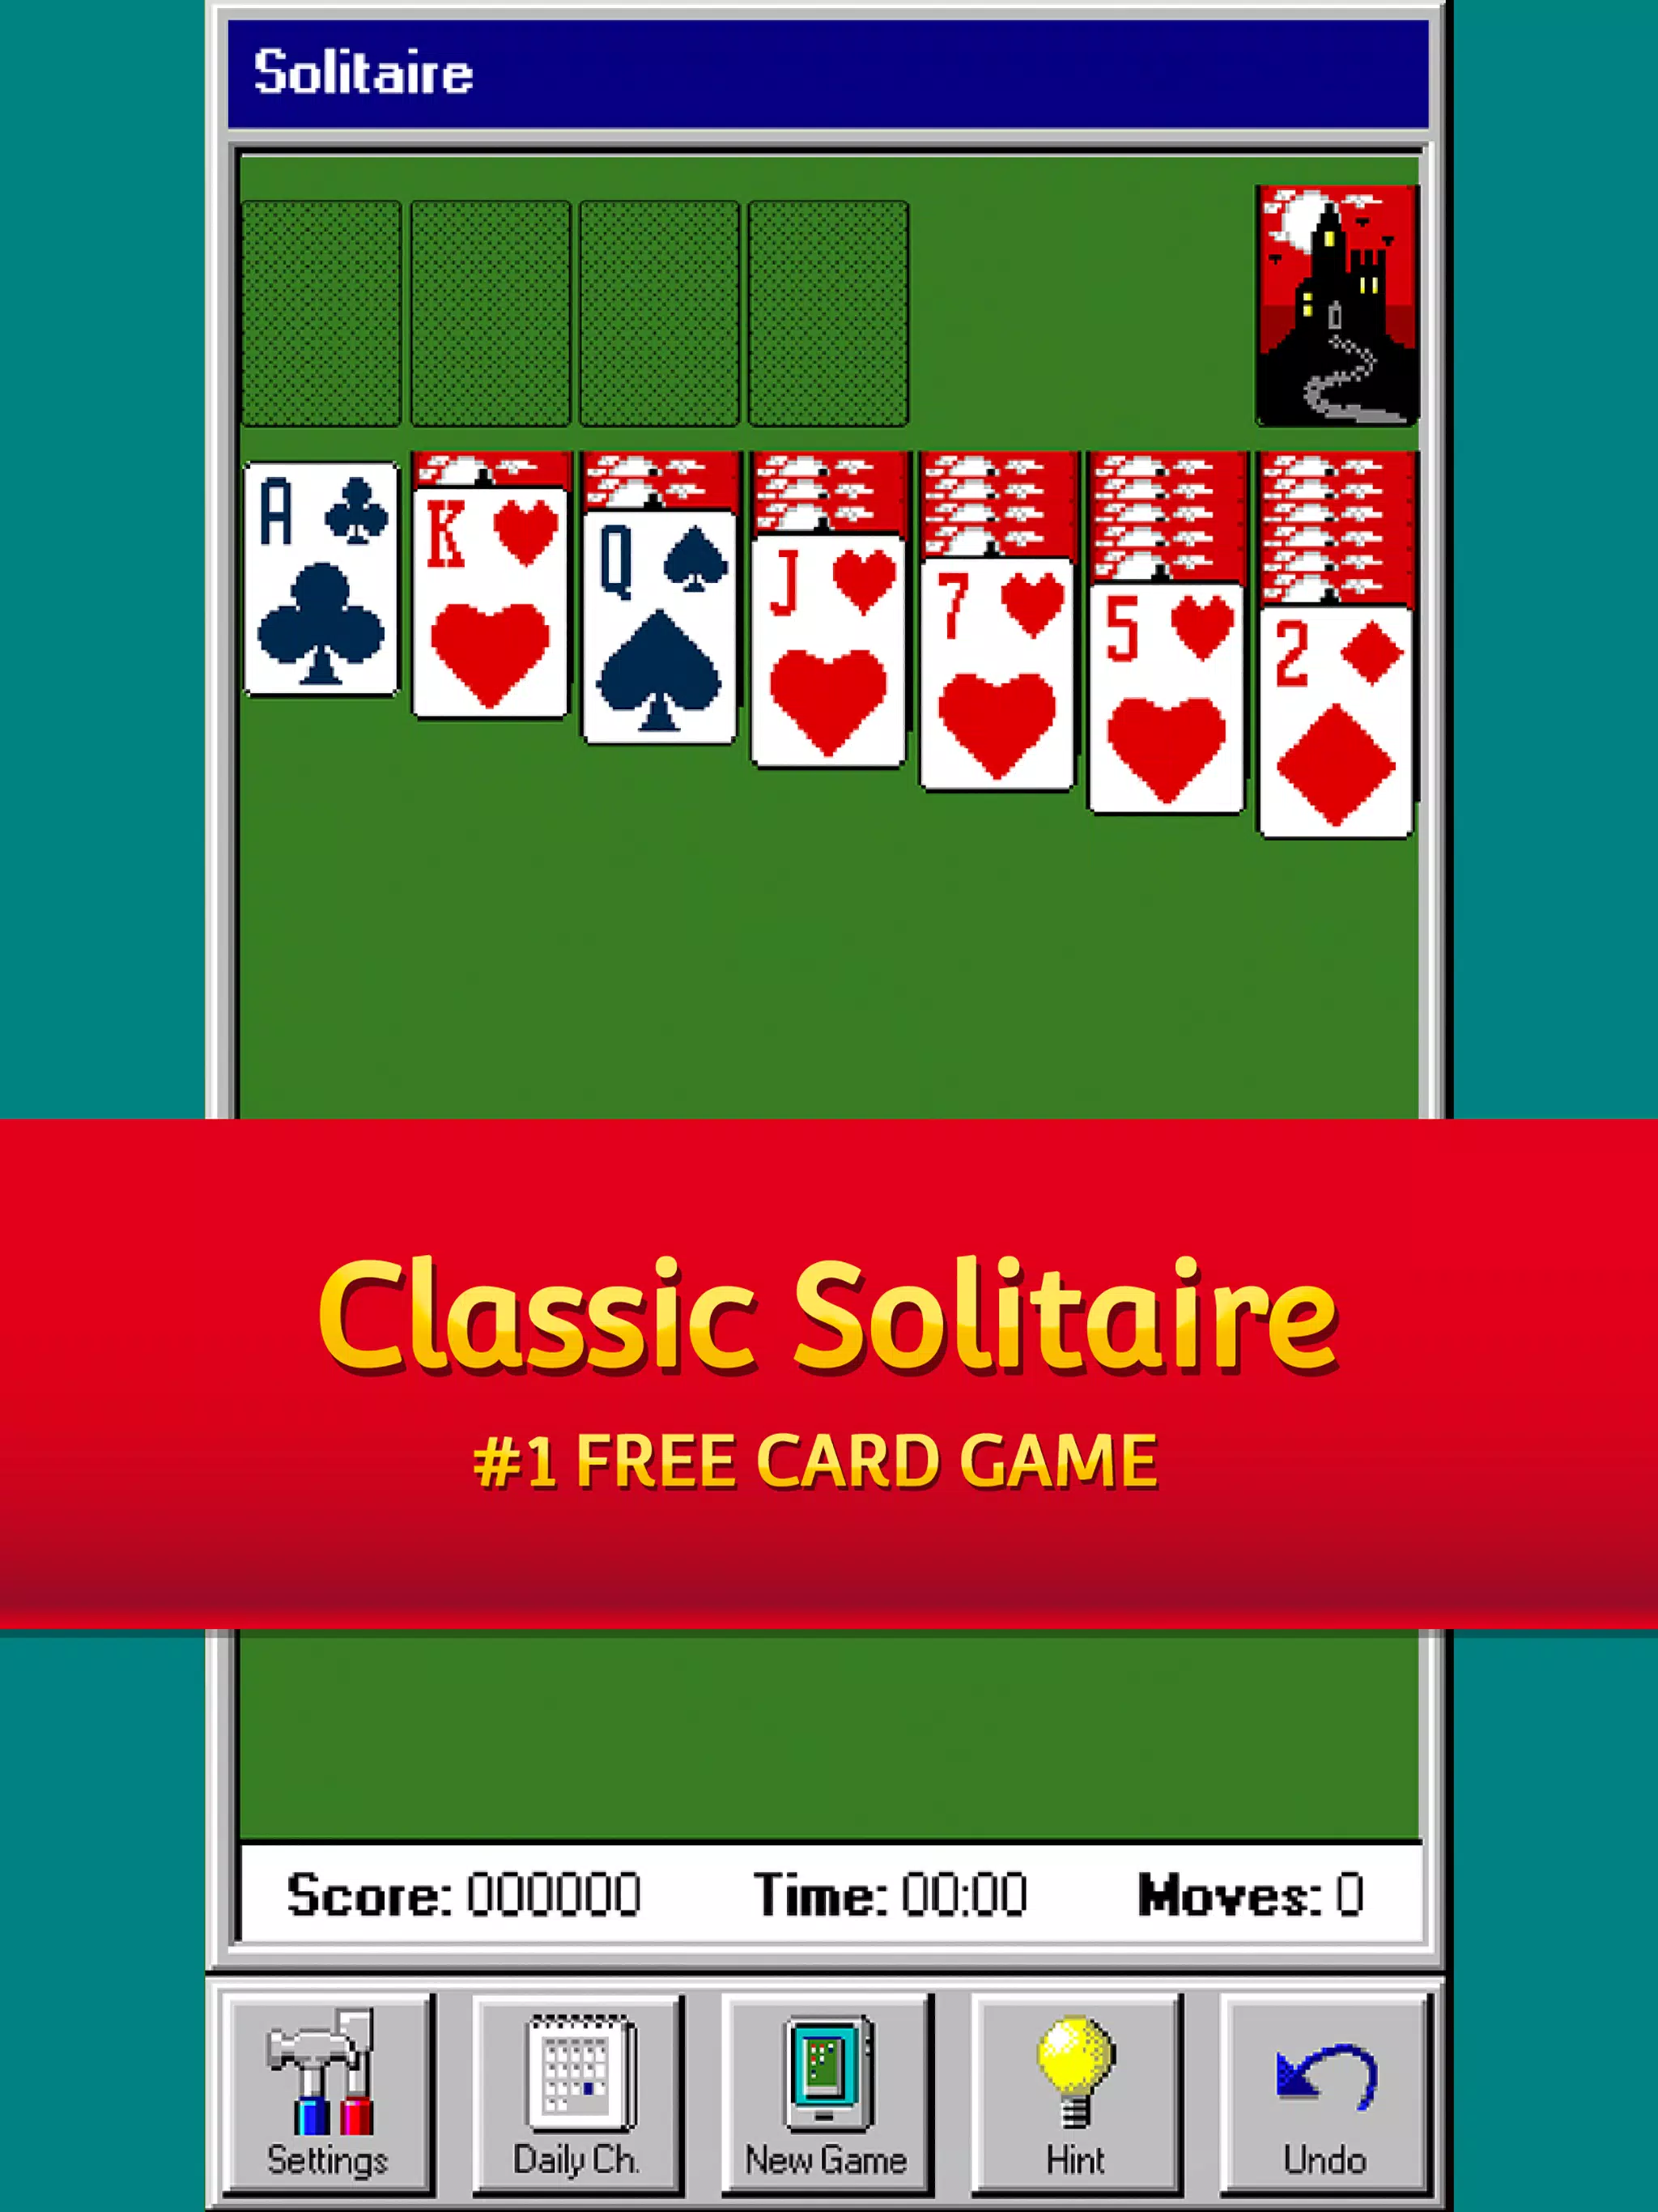 Windows 'Solitaire' game comes to Android and iOS for the first time